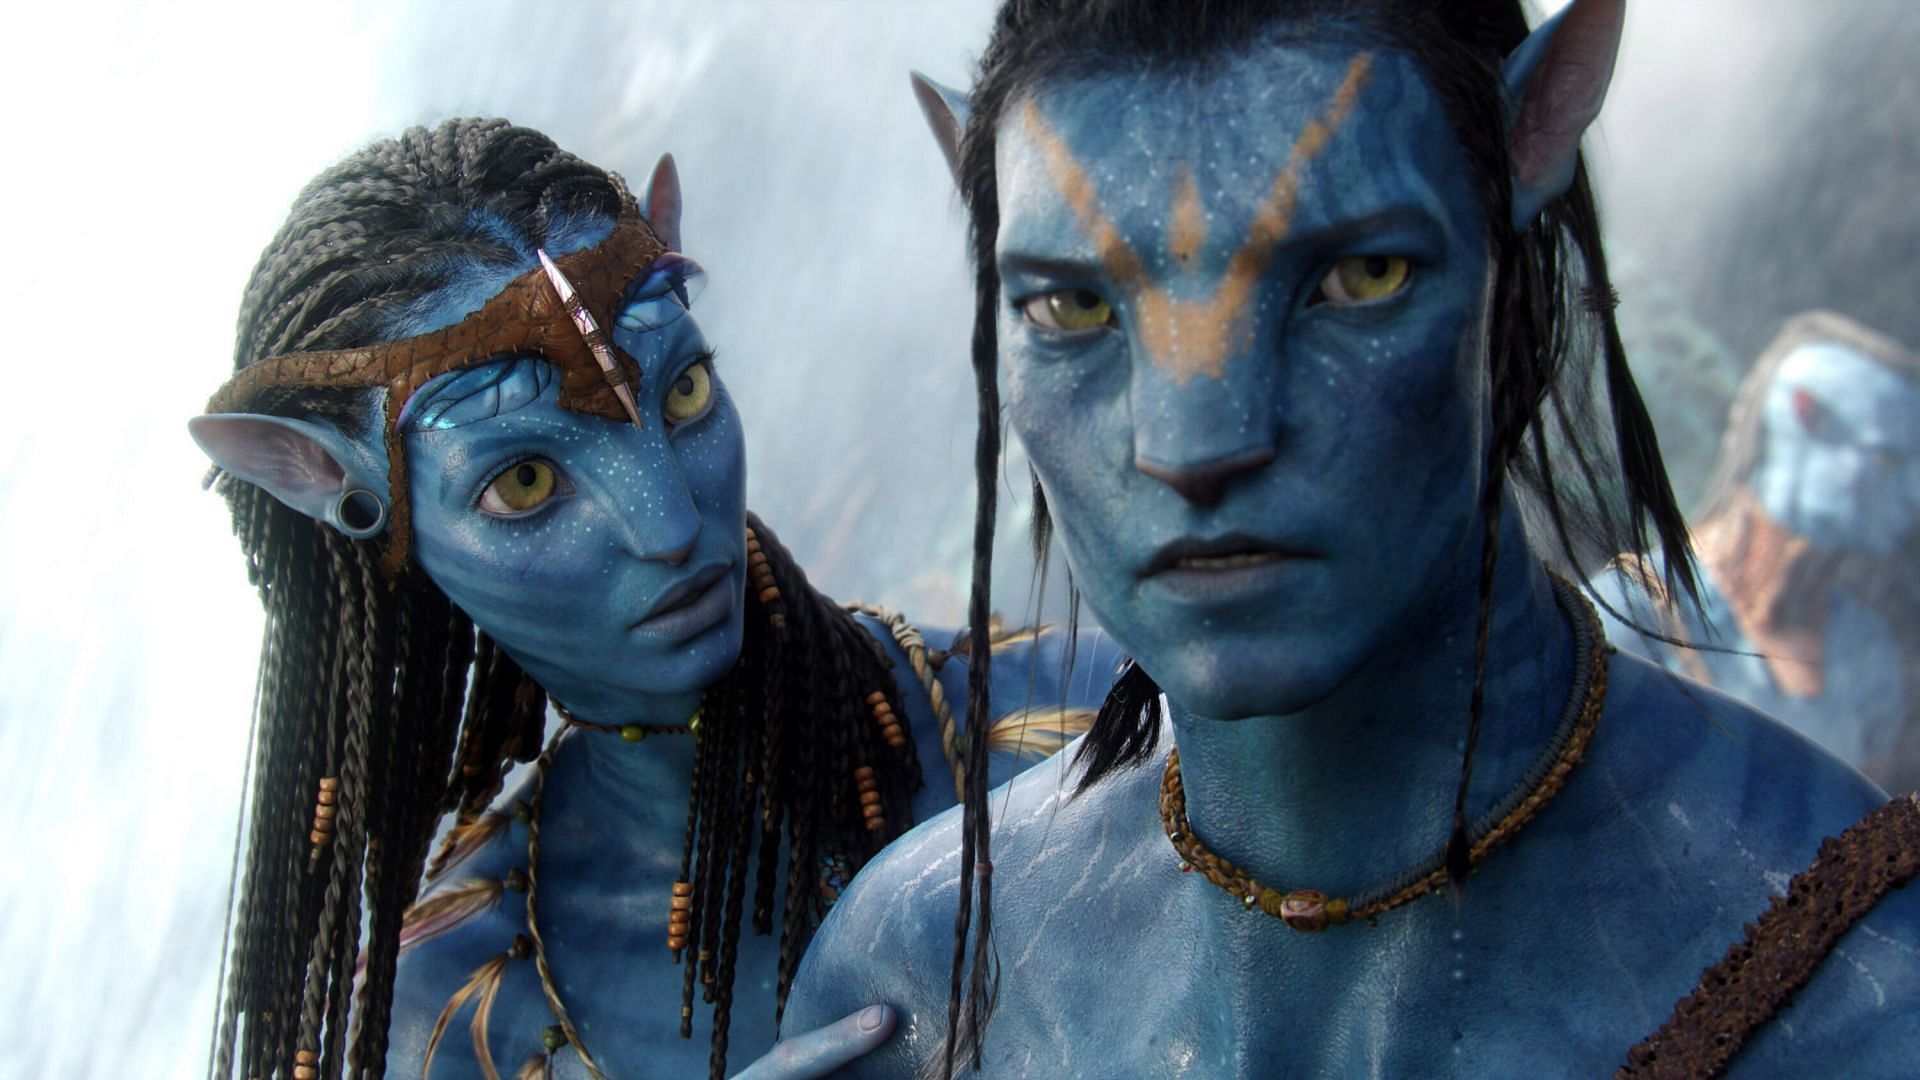 Avatar 3: The fate of Jake Sully hangs in the balance